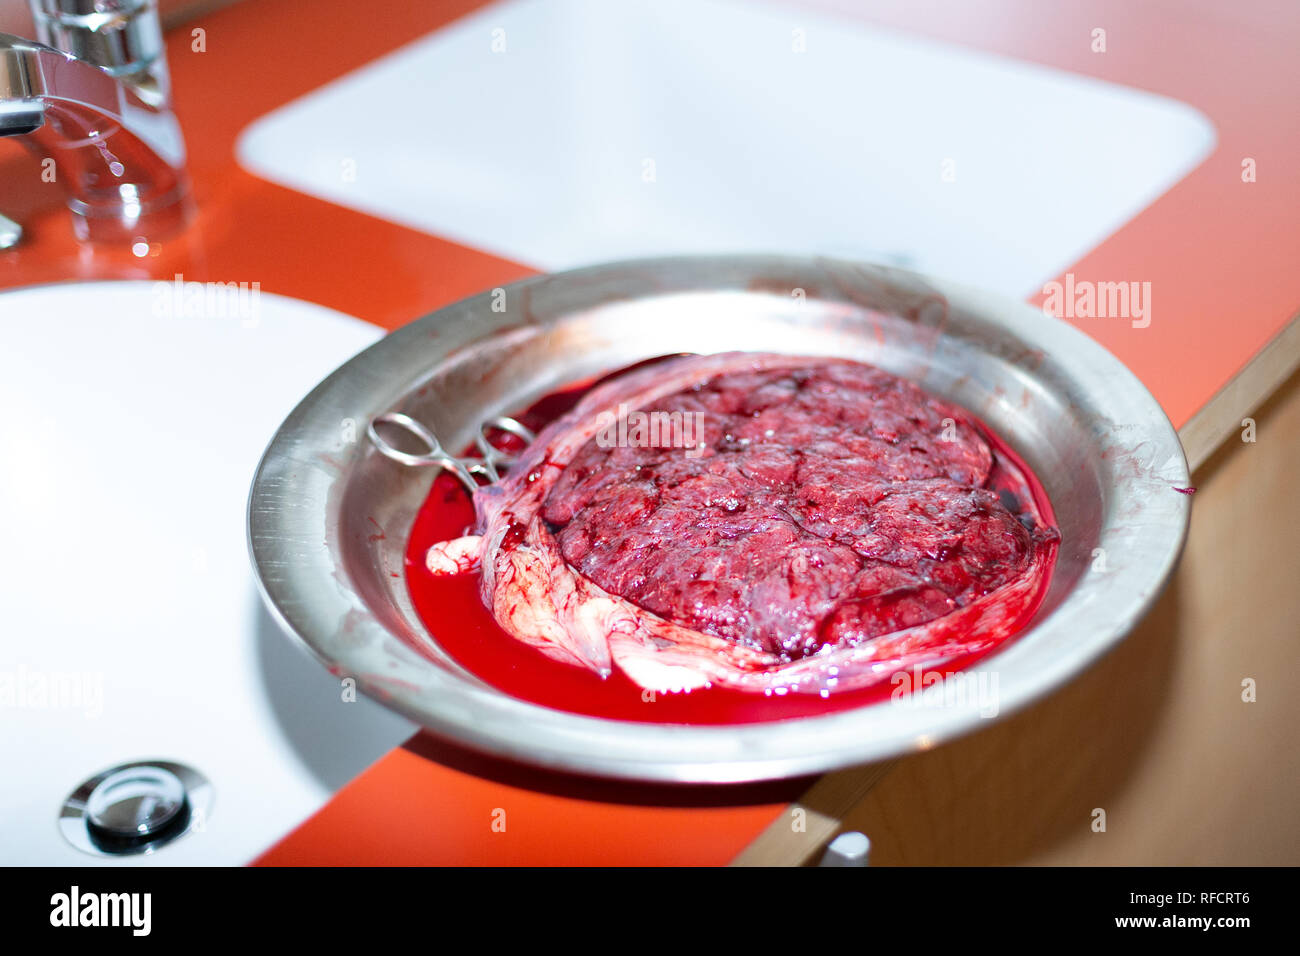 Human placenta with umbilical cord and surgical scissors on a metal plate next to a sink. Stock Photo